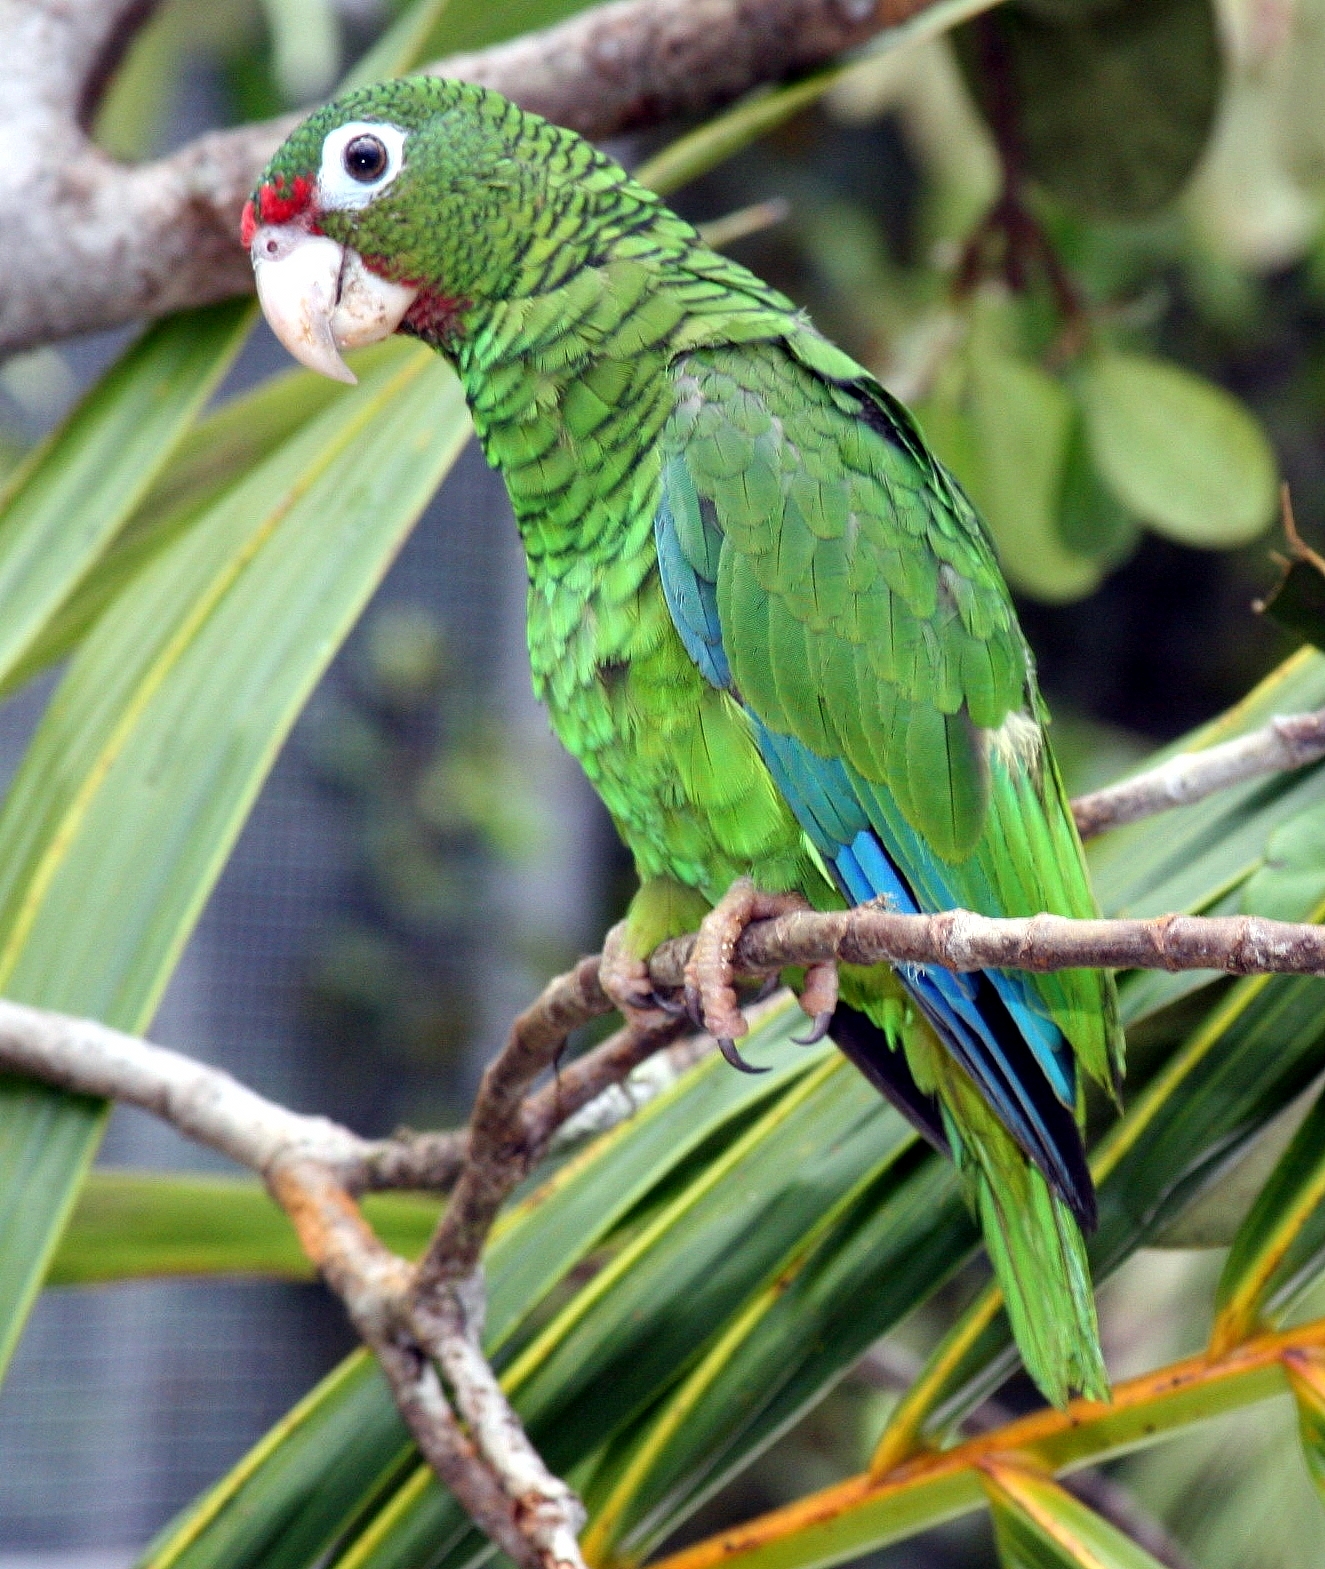 File:Puerto Rican parrot.jpg - Wikimedia Commons